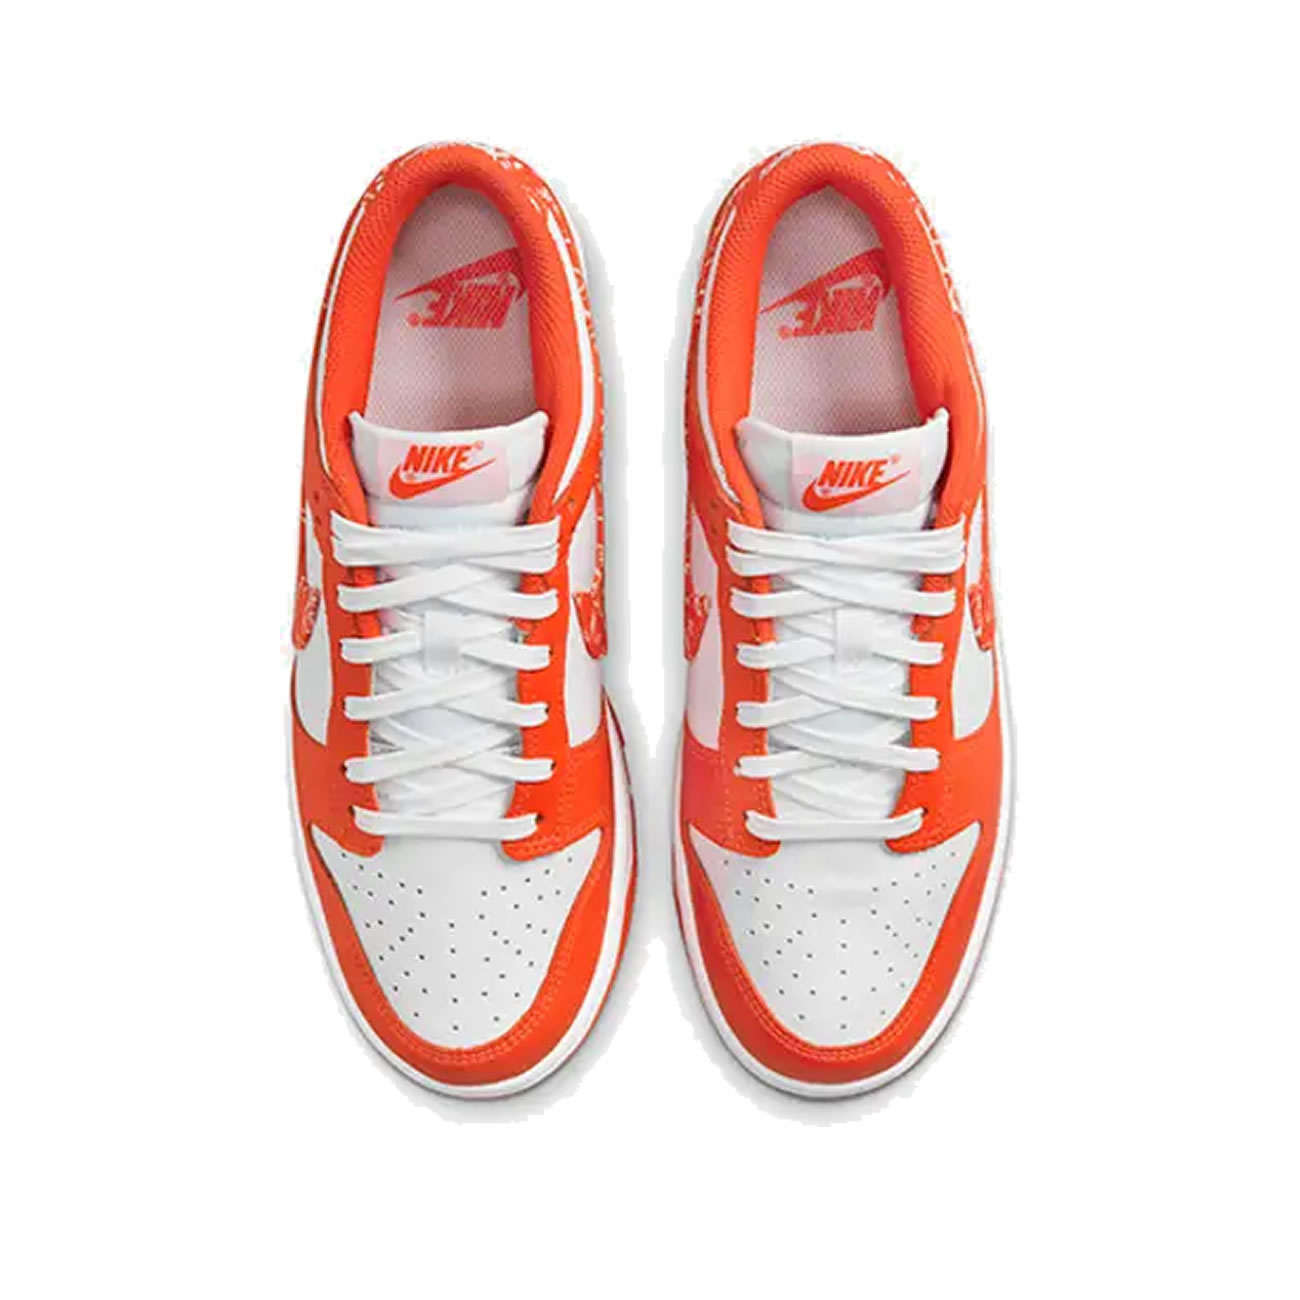 Nike Dunk Low Essential Paisley Pack Orange W Dh4401 103 (5) - newkick.org